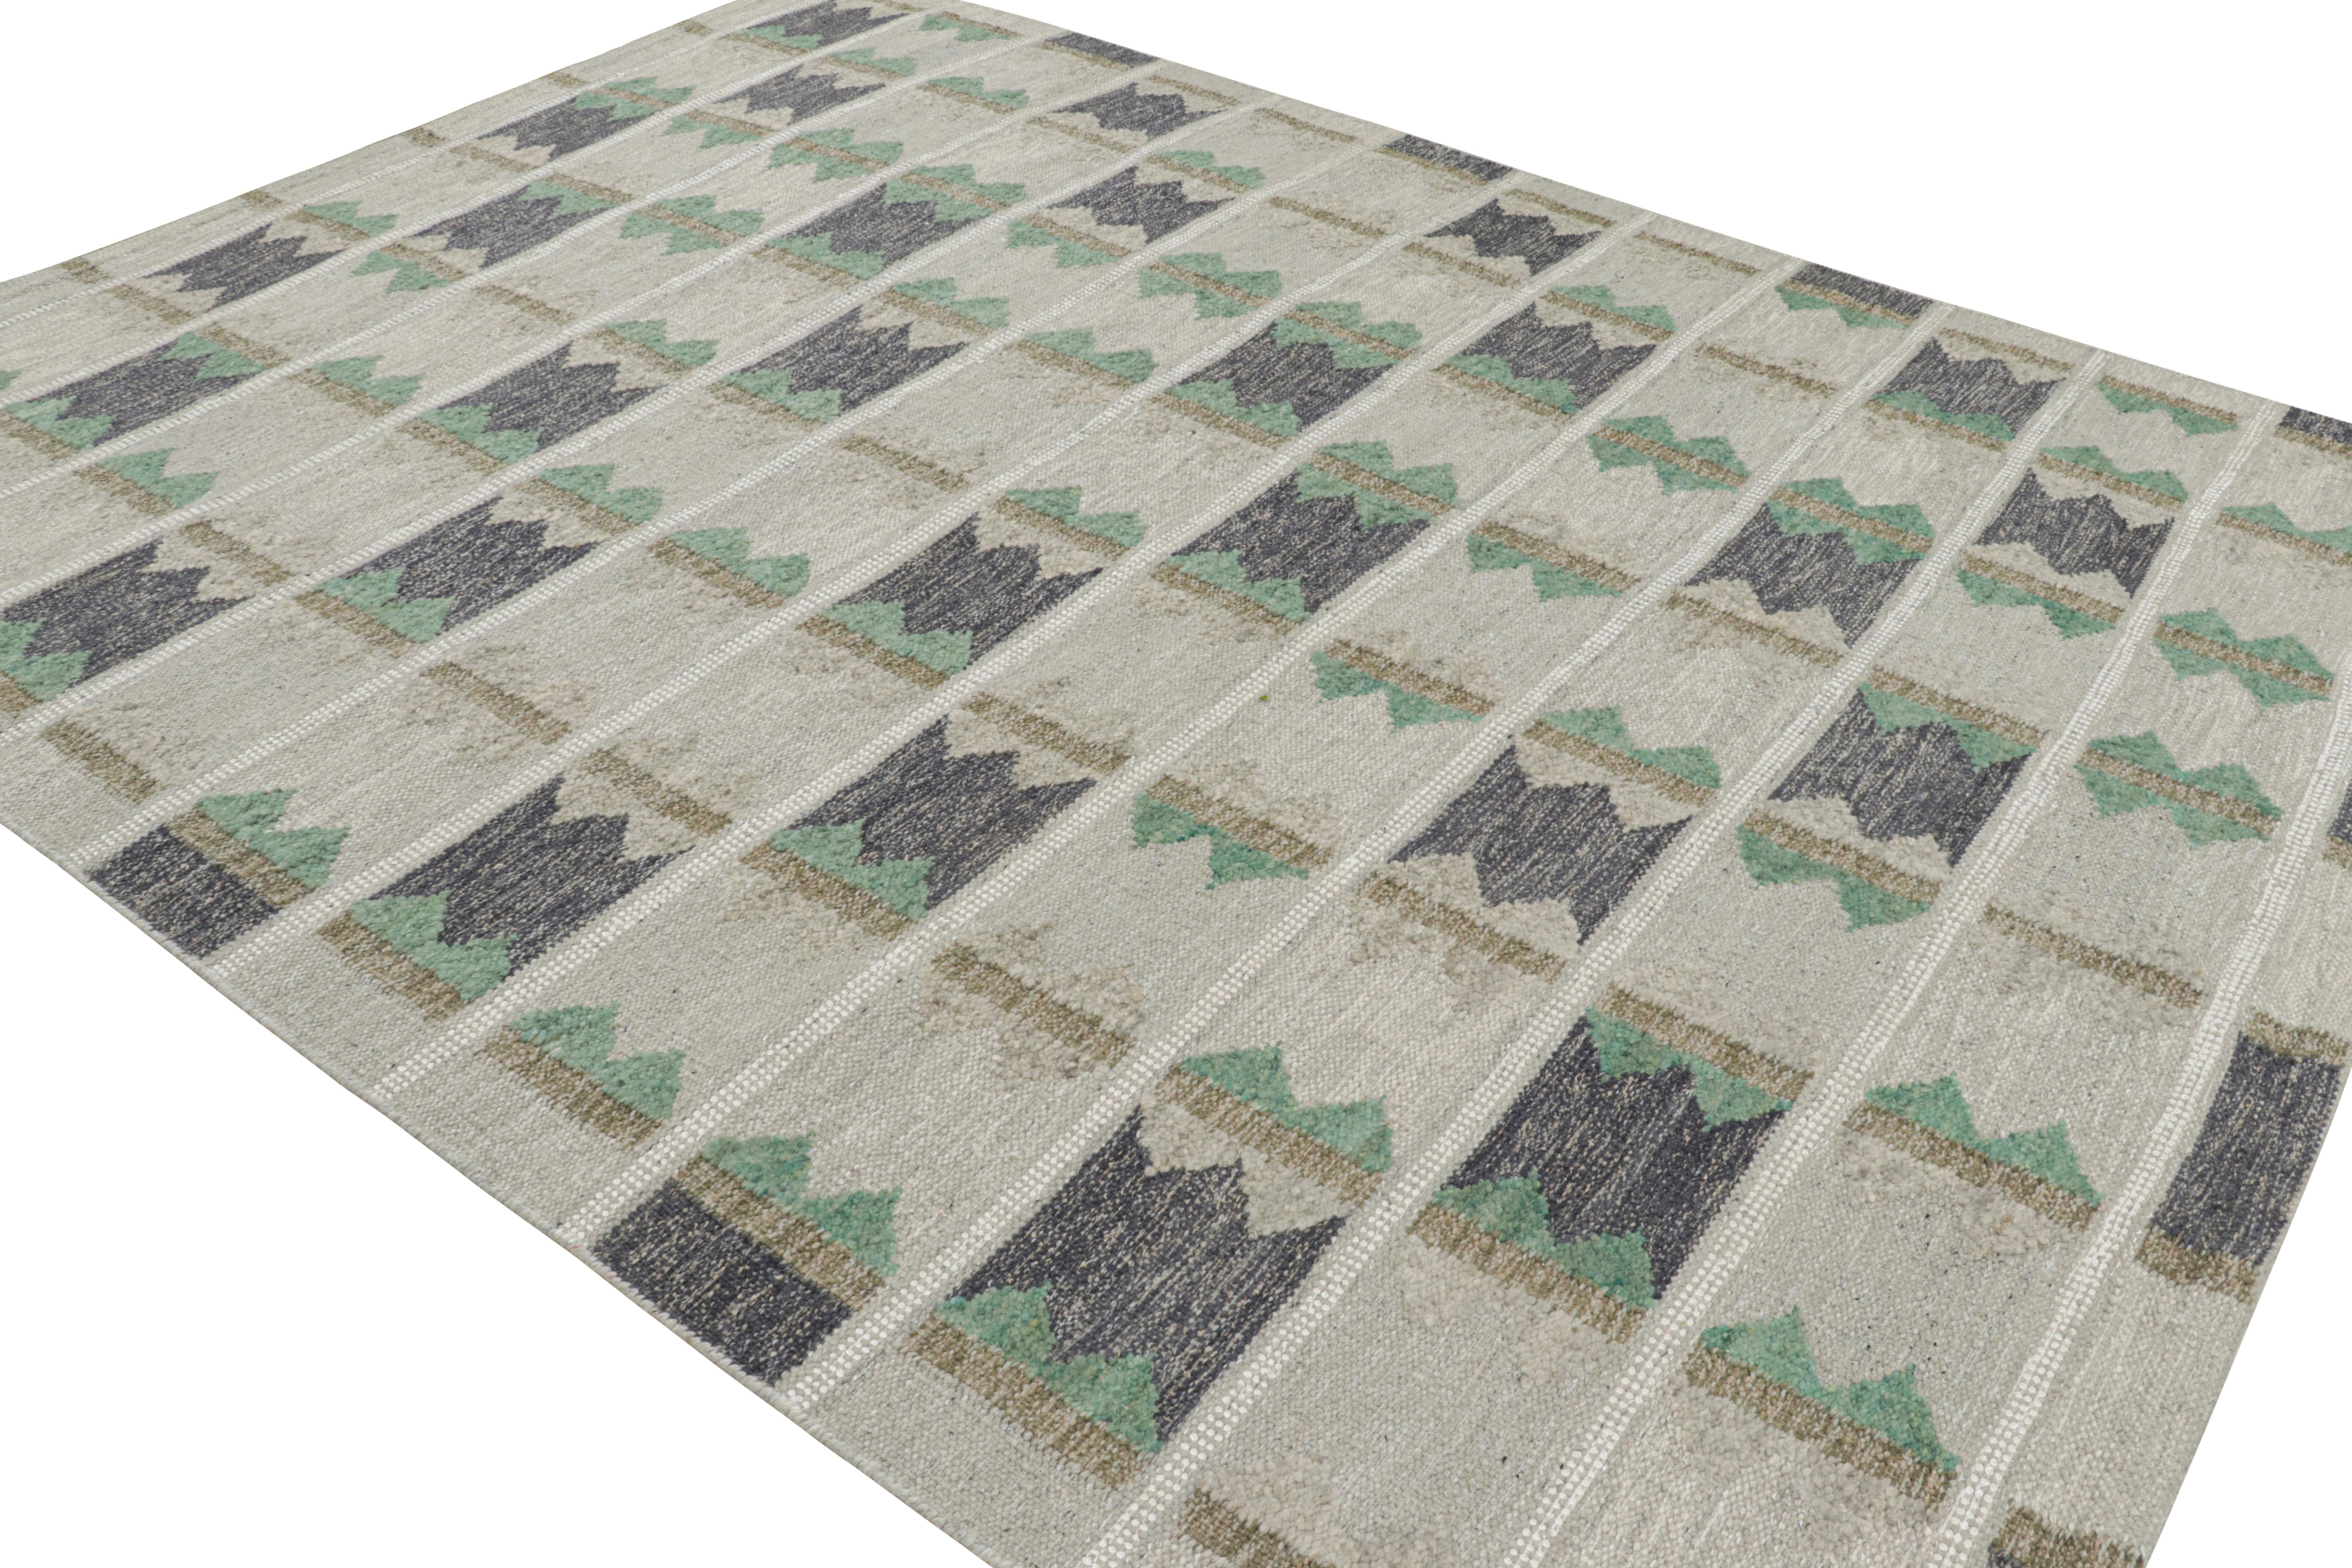 Indian Rug & Kilim’s Scandinavian Style Rug with Geometric Patterns in Tones of Green For Sale